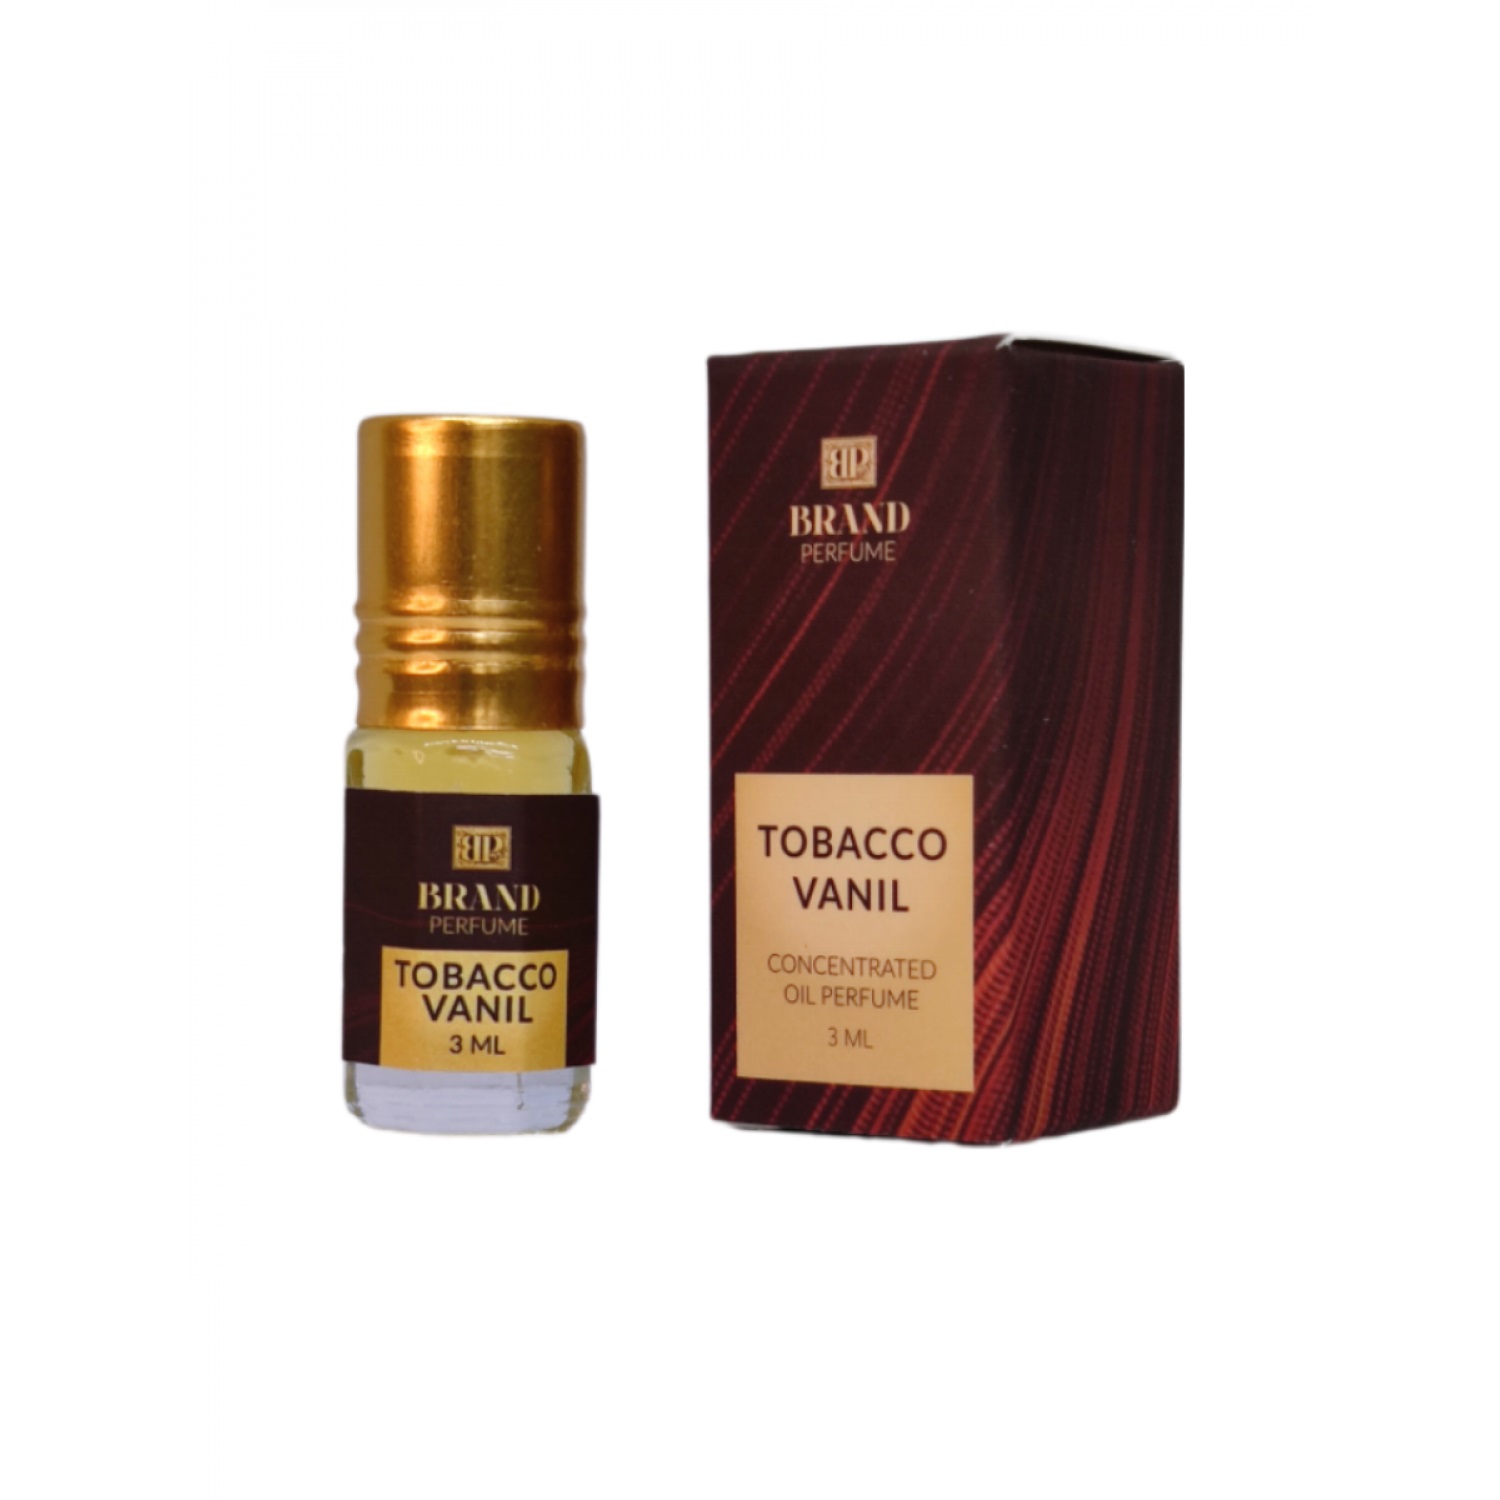 TOBACCO VANIL Concentrated Oil Perfume, Brand Perfume (Концентрированные масляные духи), ролик, 3 мл.